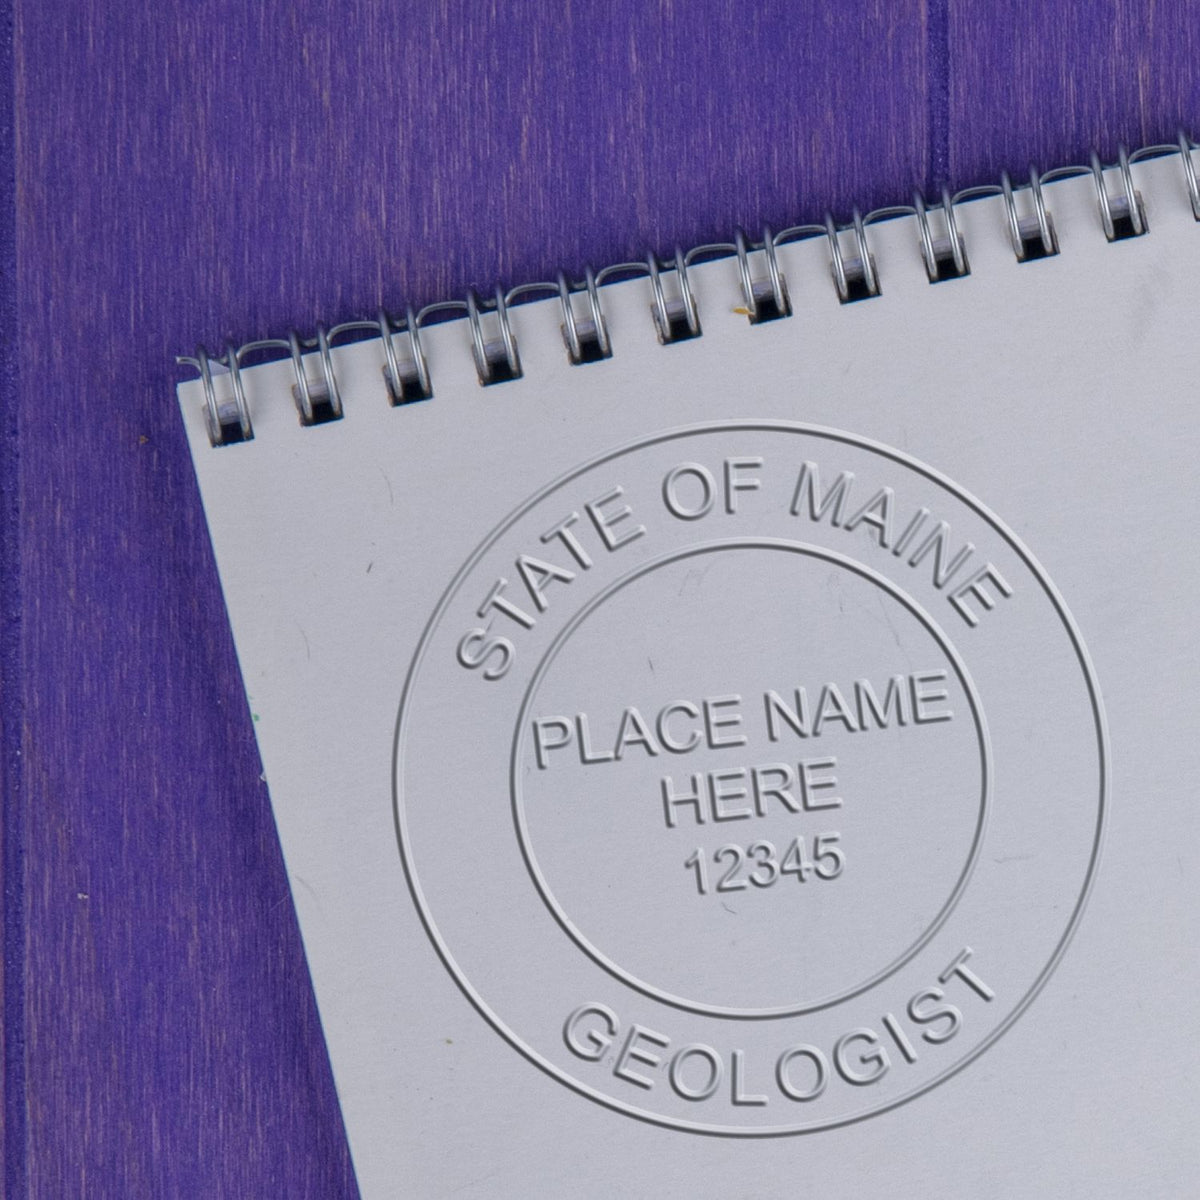 A lifestyle photo showing a stamped image of the Handheld Maine Professional Geologist Embosser on a piece of paper